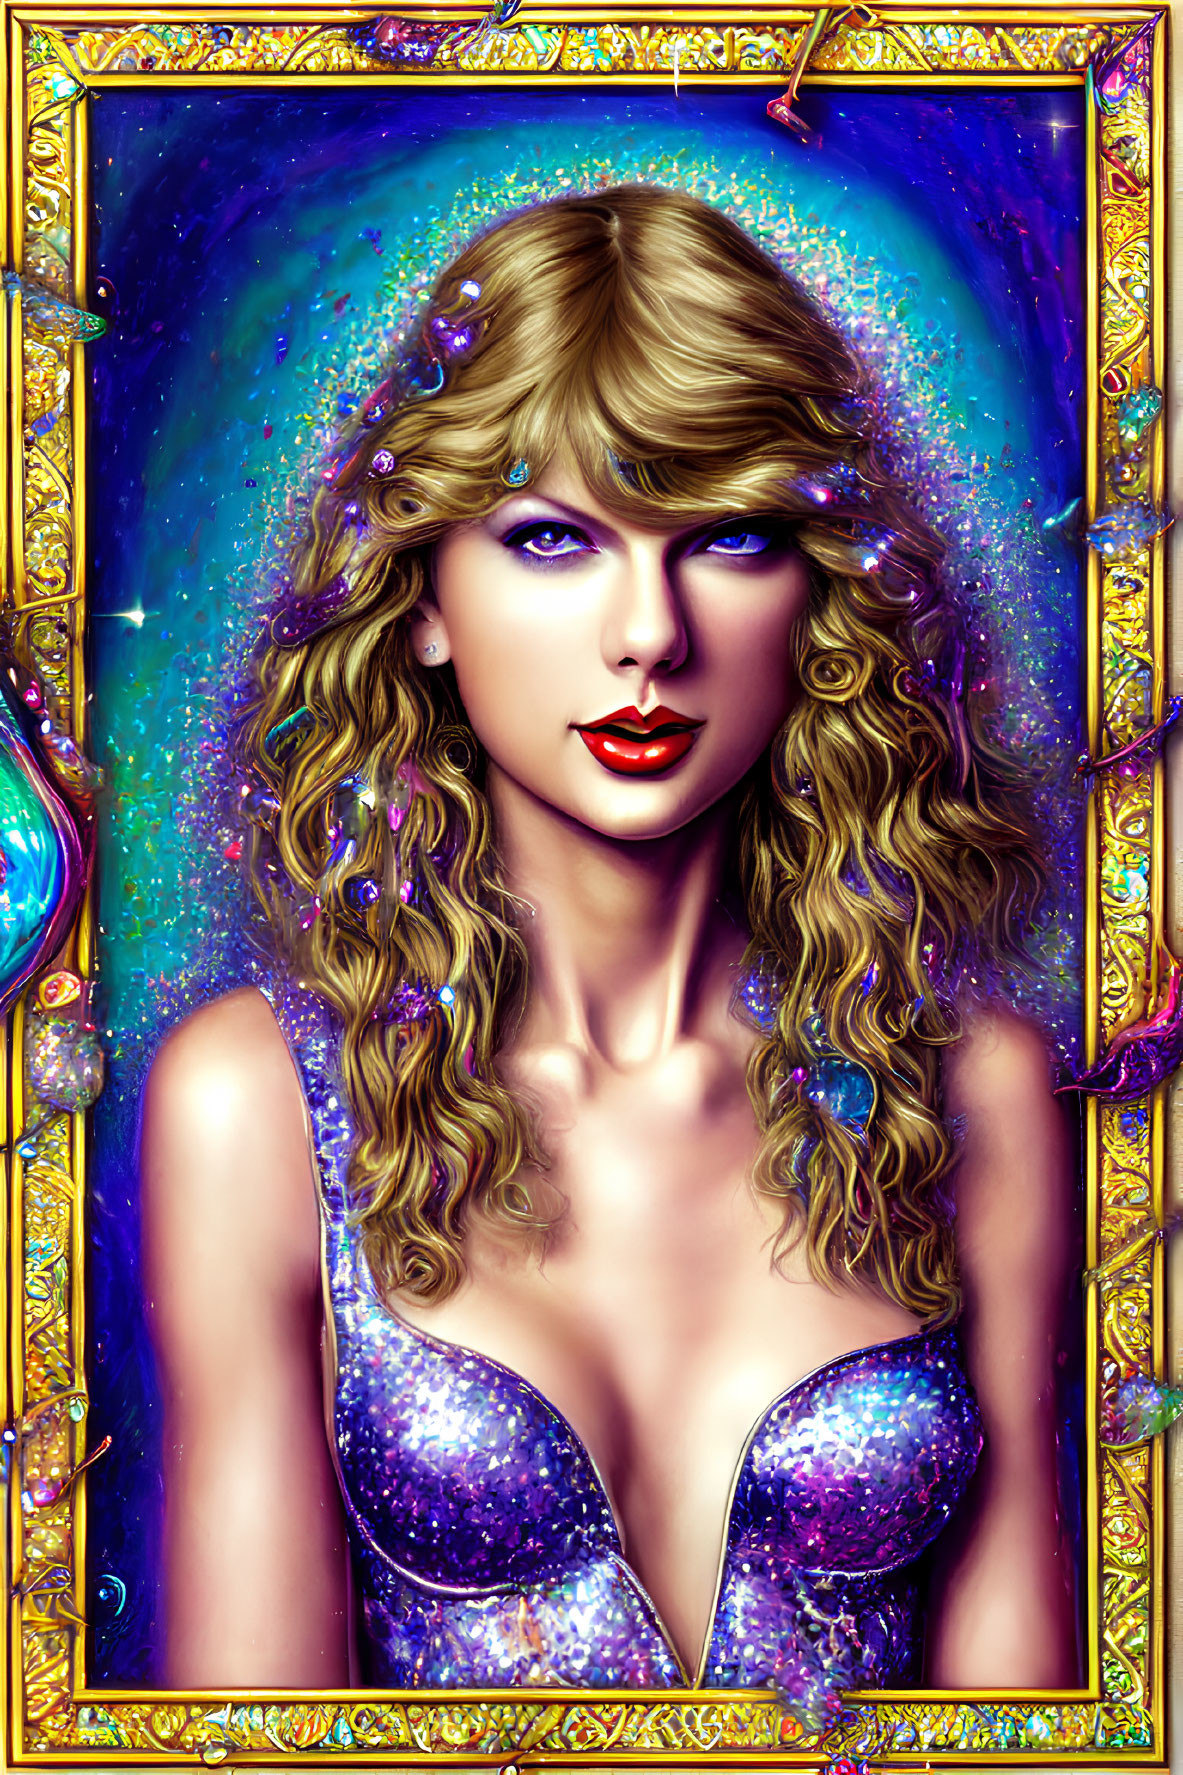 Digital painting of woman with curly blond hair and red lipstick in sparkling purple dress, framed by ornate